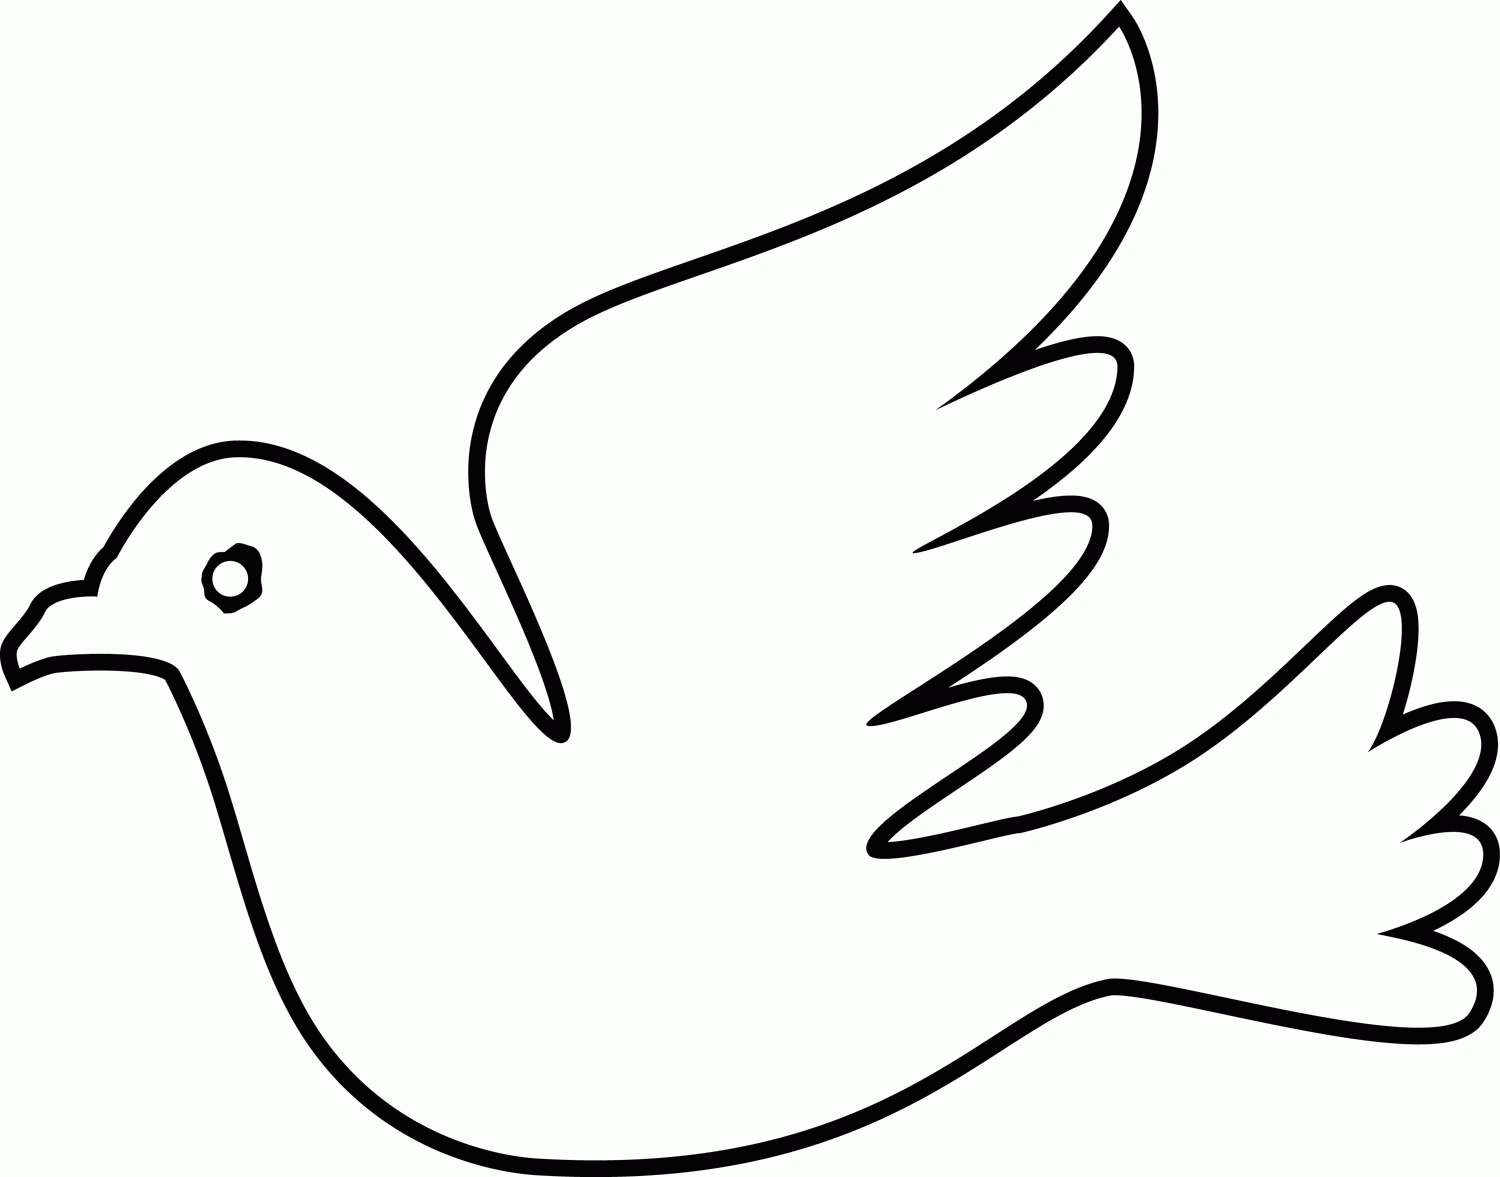 doves coloring pages dove coloring pages download and print dove coloring pages coloring pages doves 